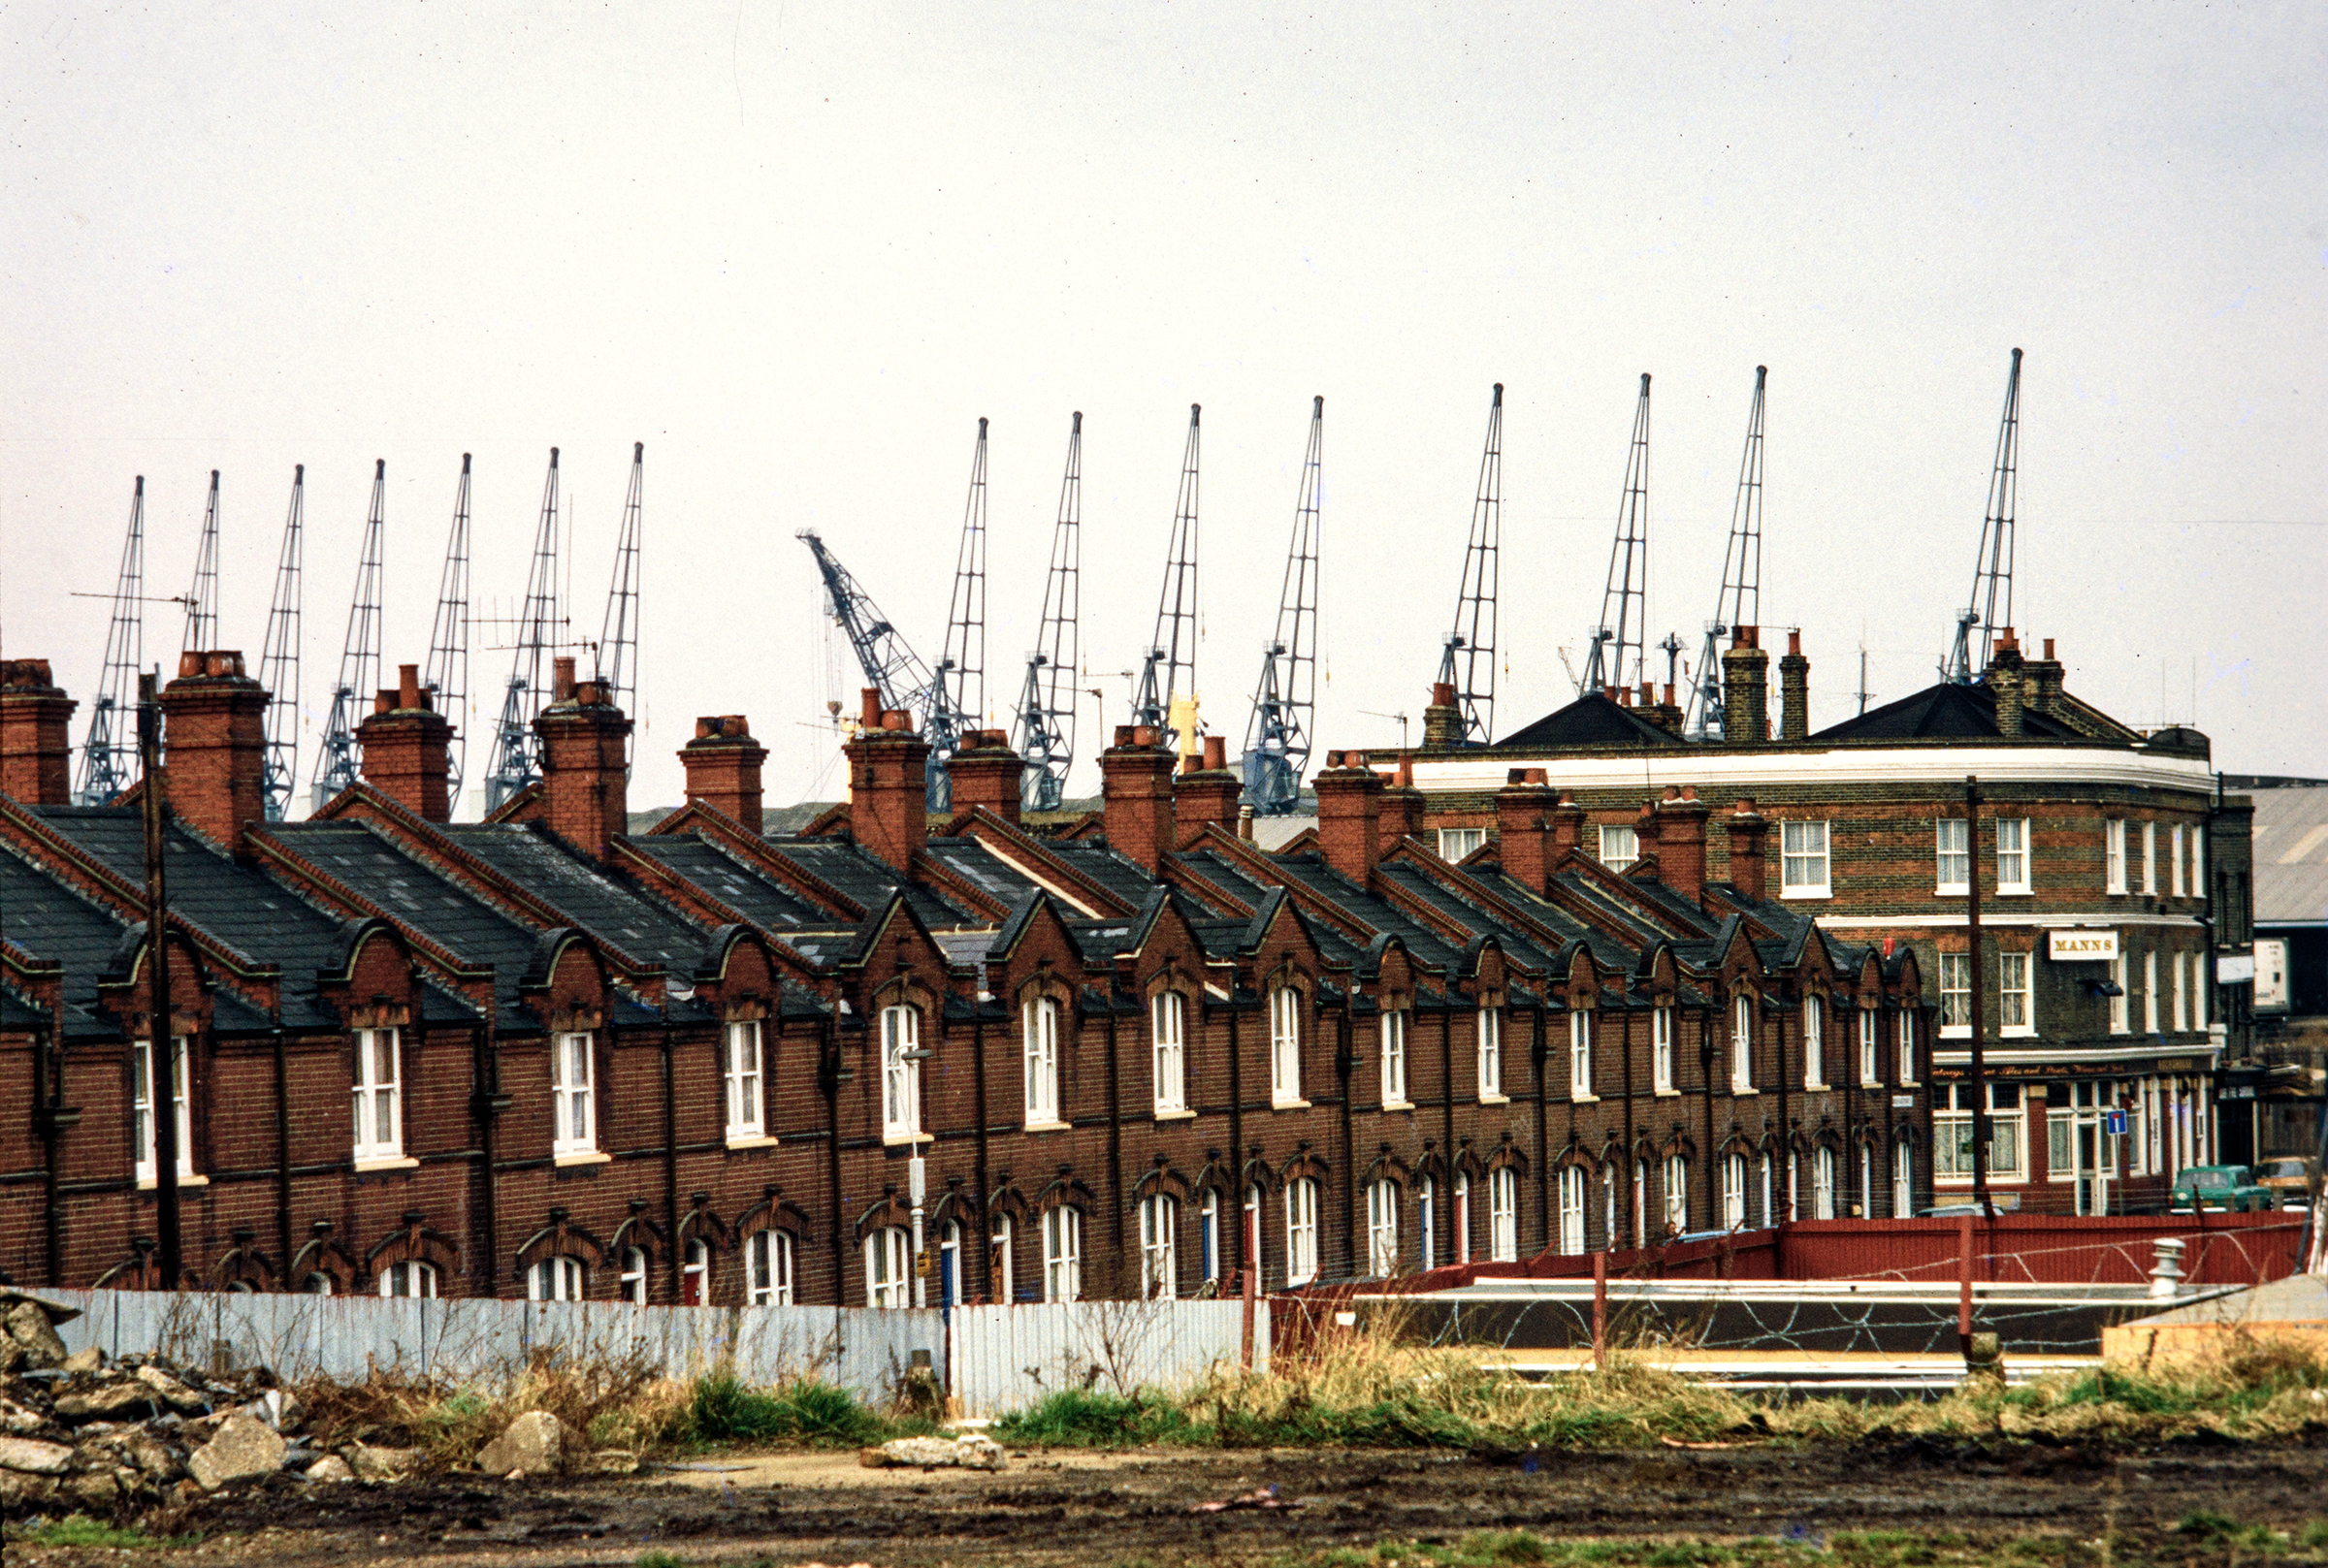 Barge House Rd, North Woolwich, Newham, 1984